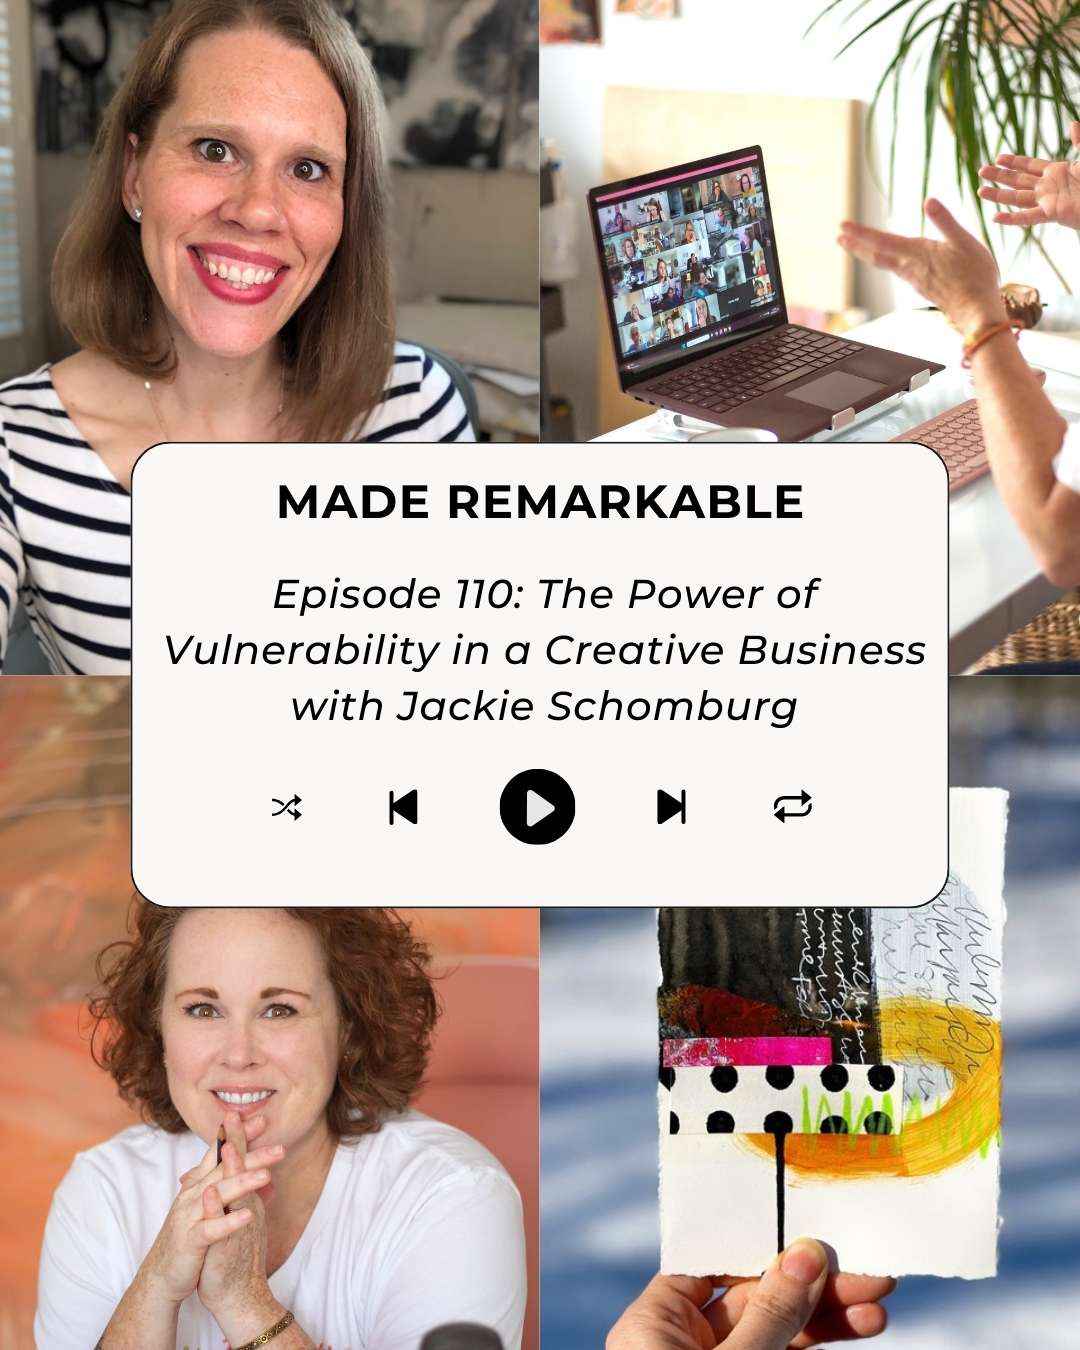 Episode 110 The Power of Vulnerability in a Creative Business with Jackie Schomburg (1)